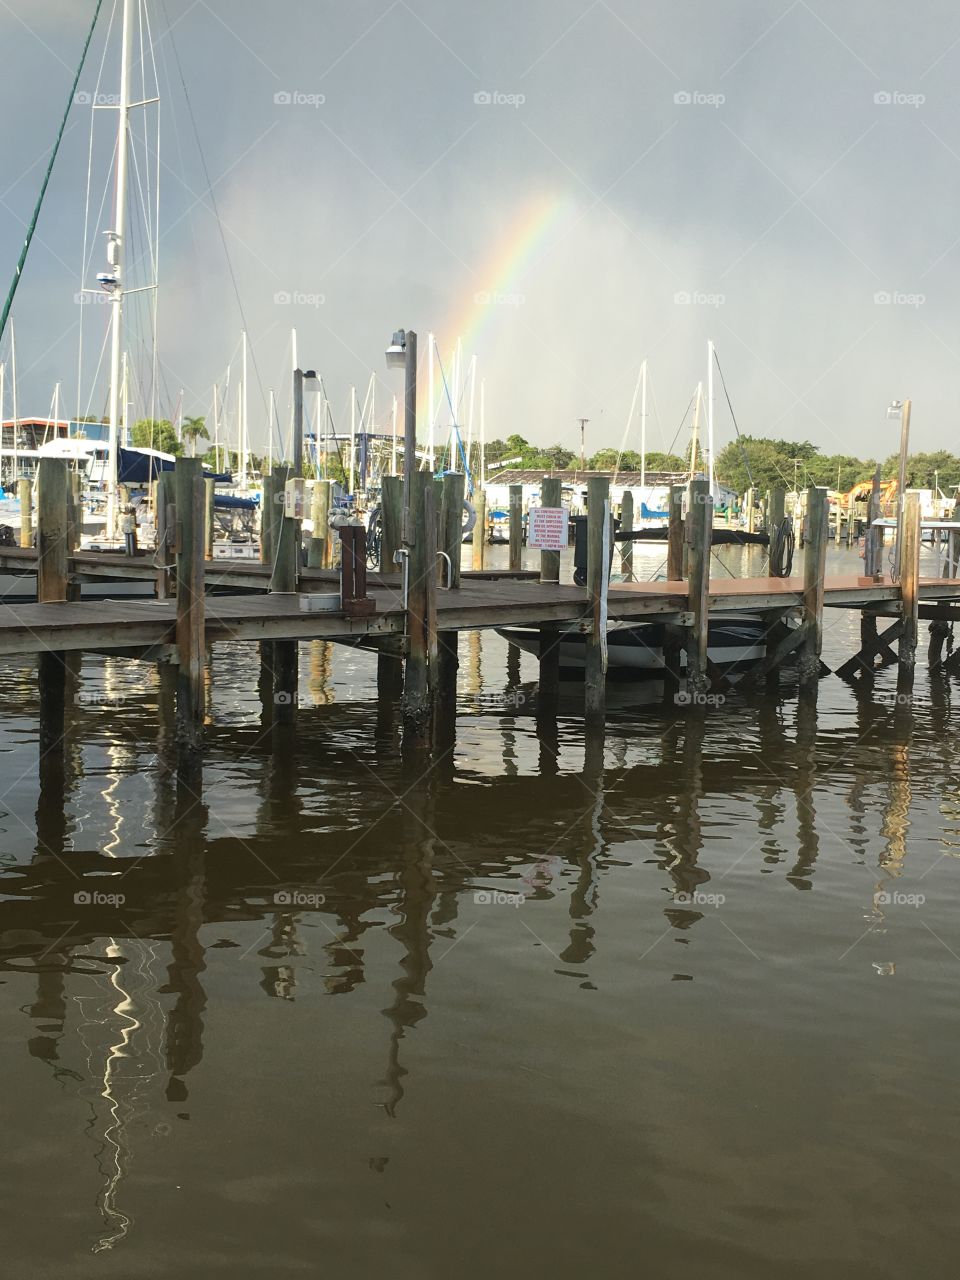 Rainbow in the water
Ft. Myers, Fl